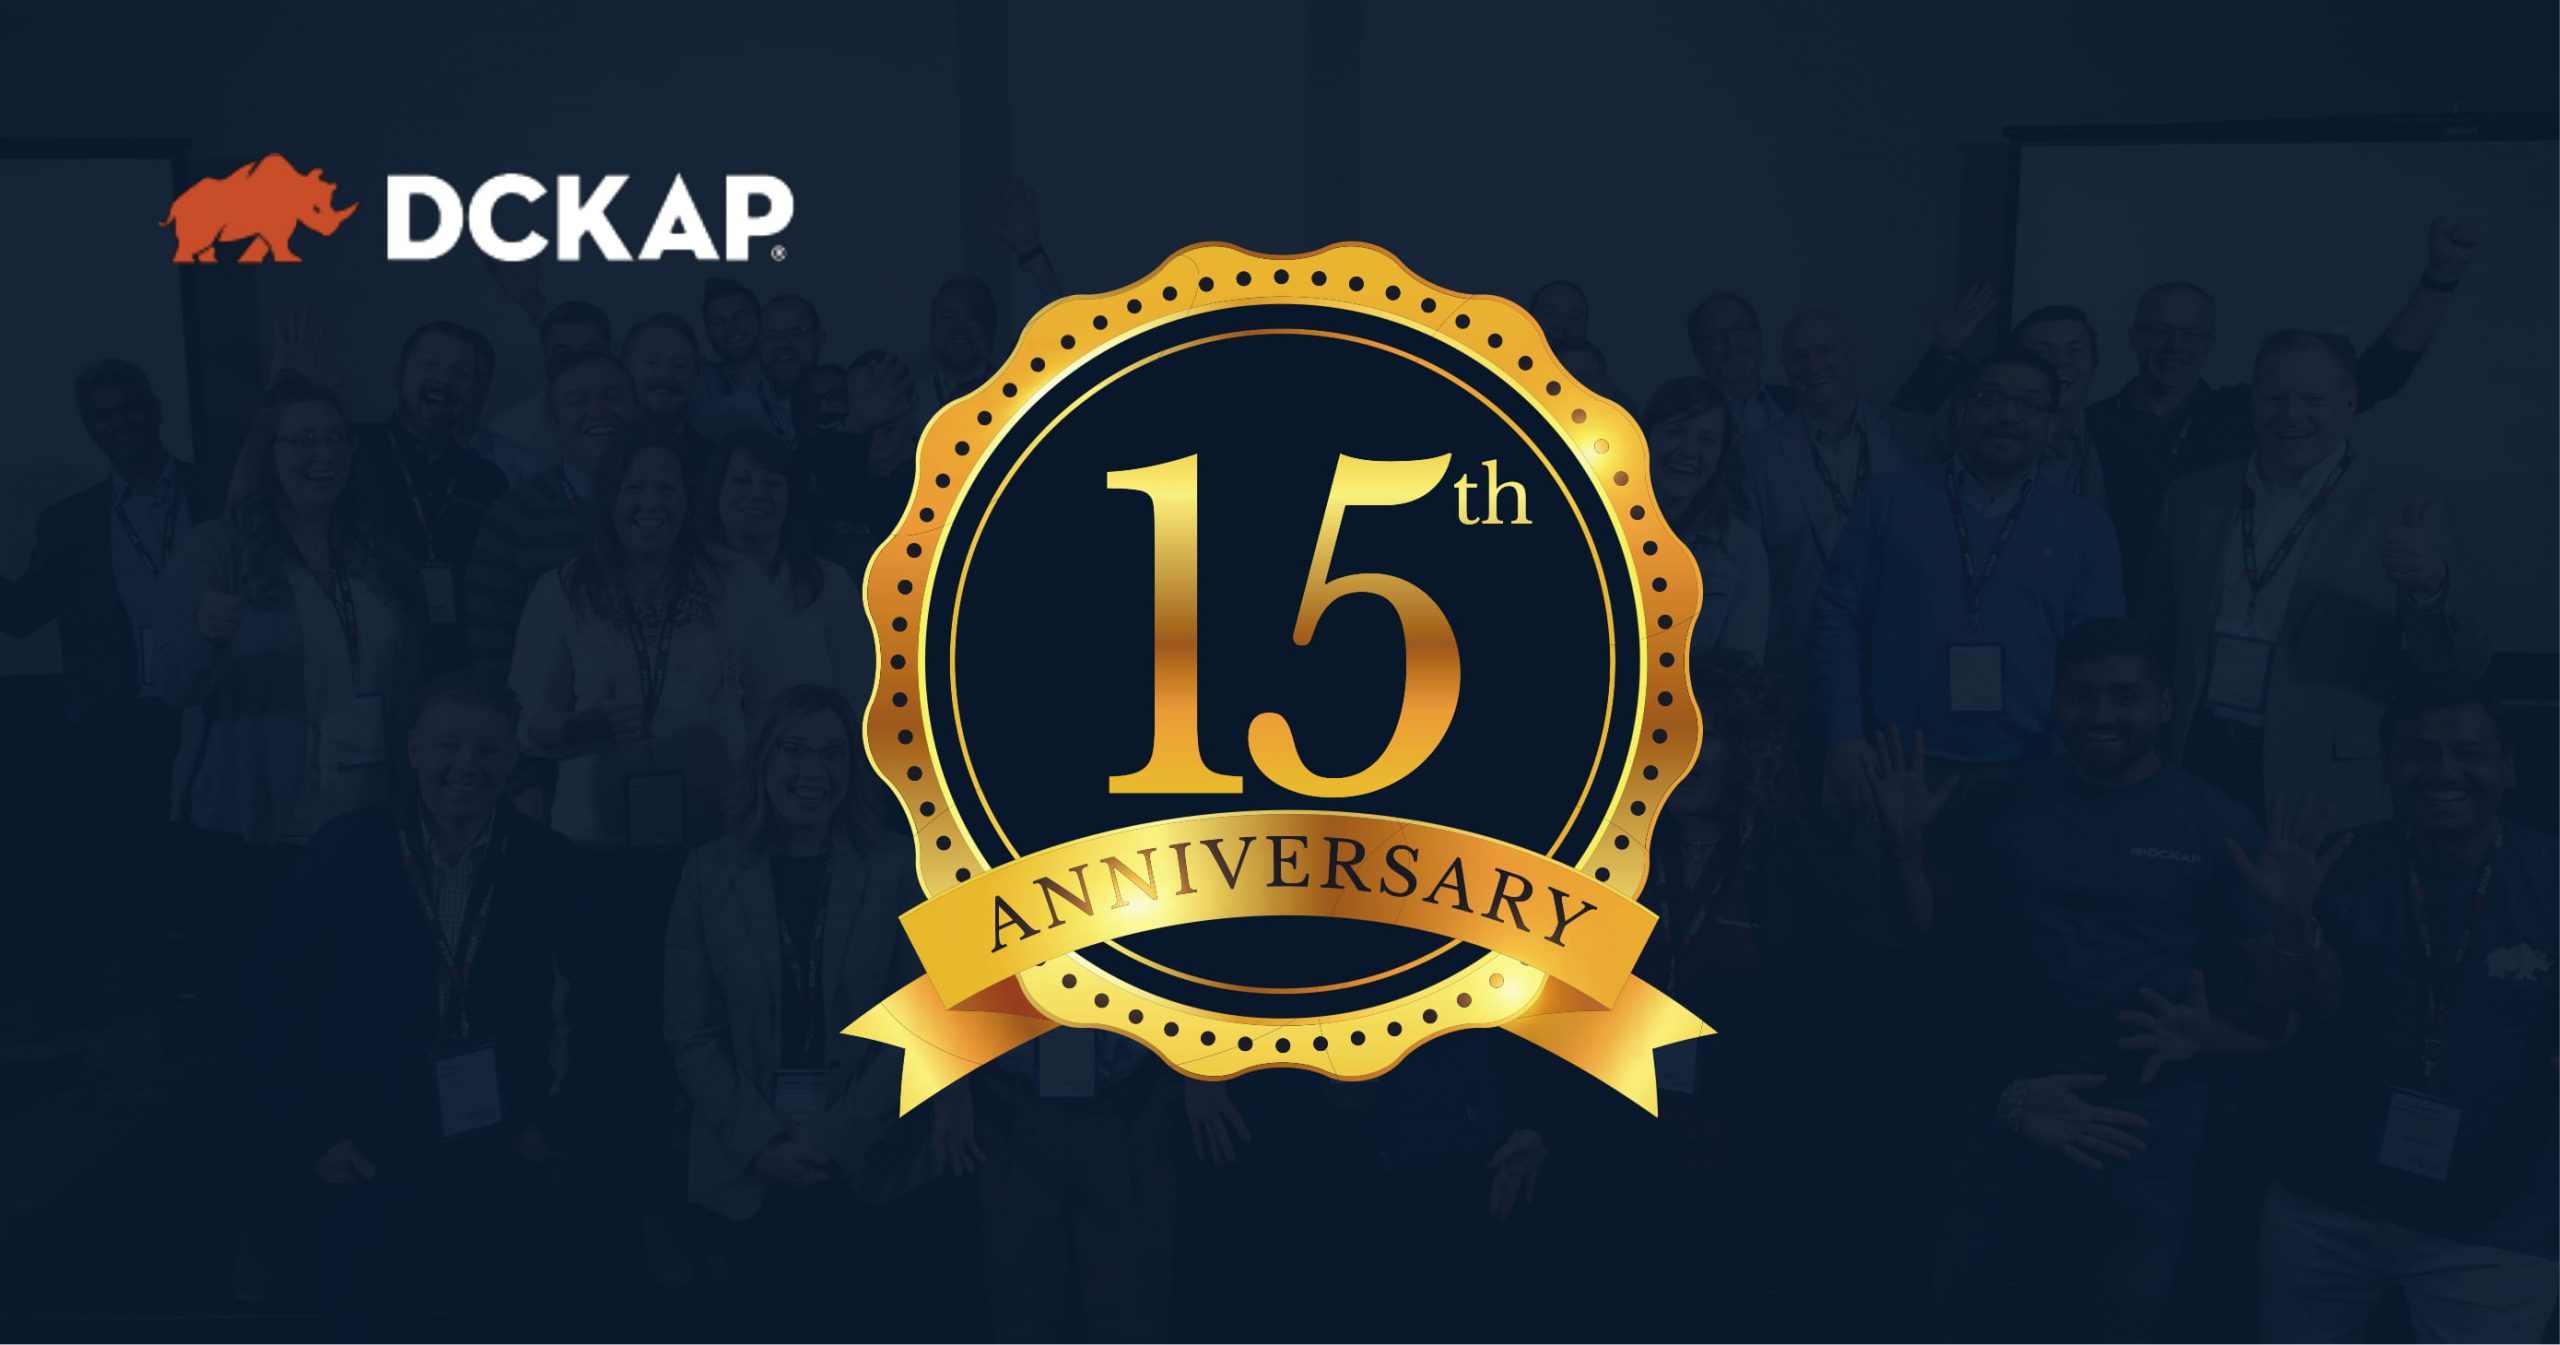 Dckap Experience and fifteen year Anniversary